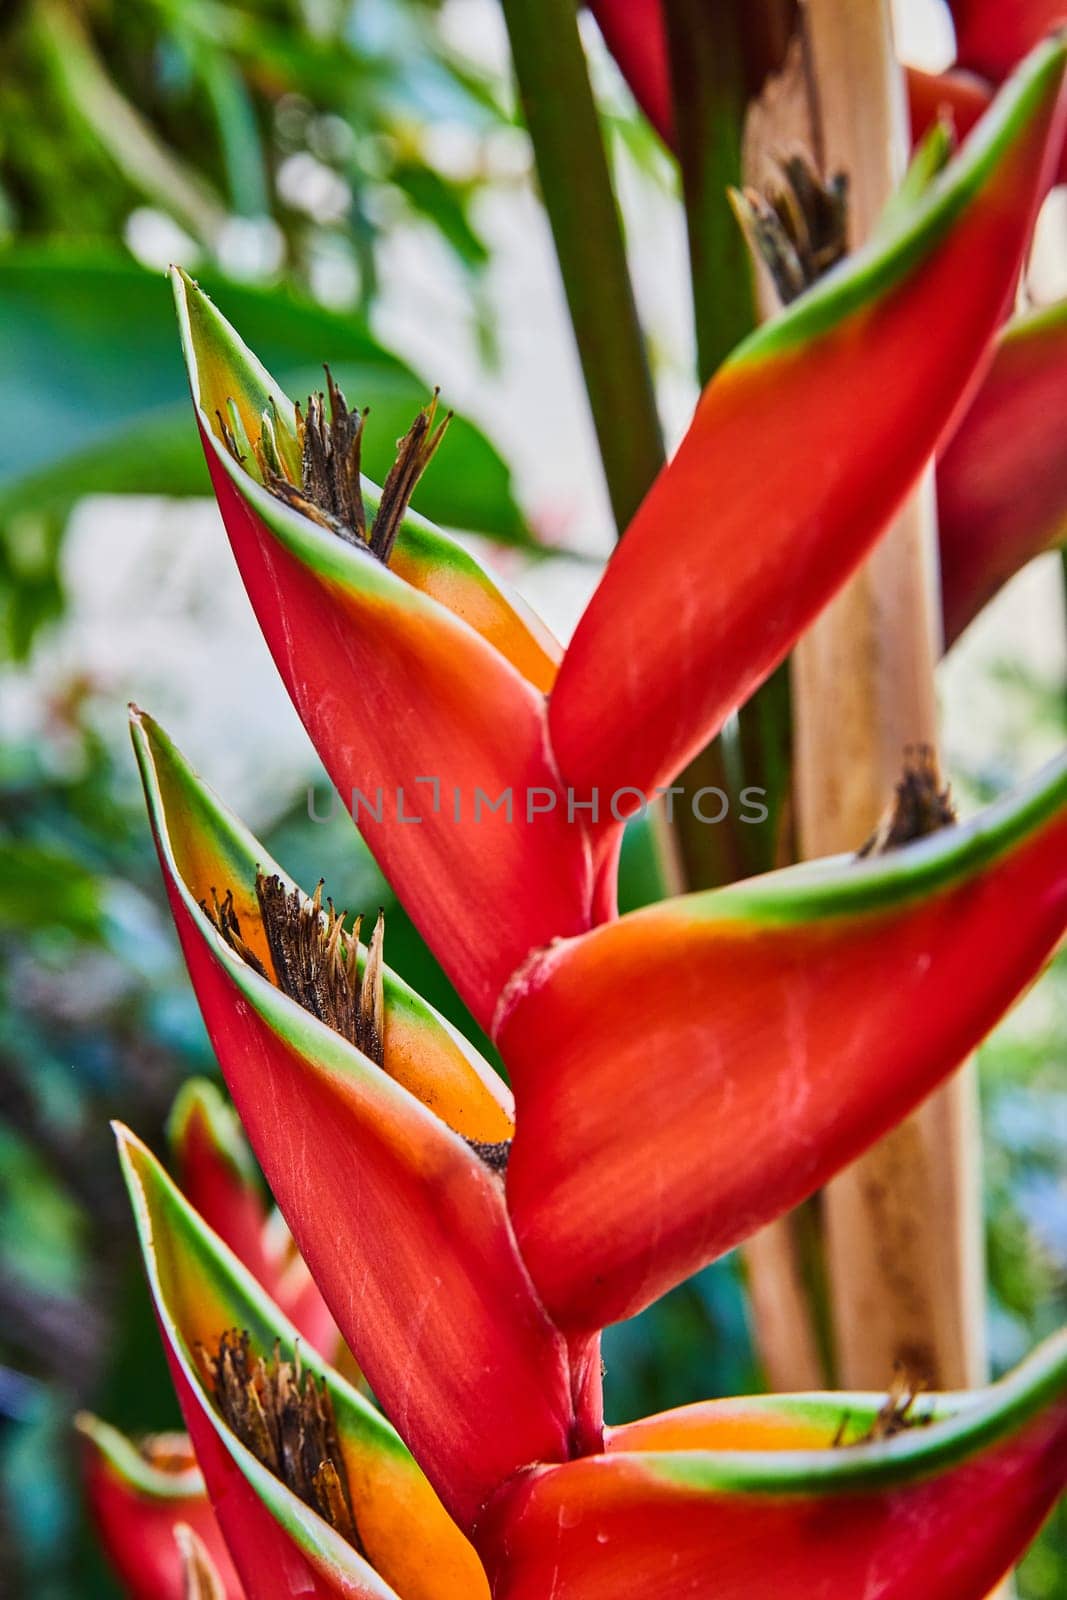 Vibrant Heliconia Flower Close-Up in Tropical Conservatory by njproductions